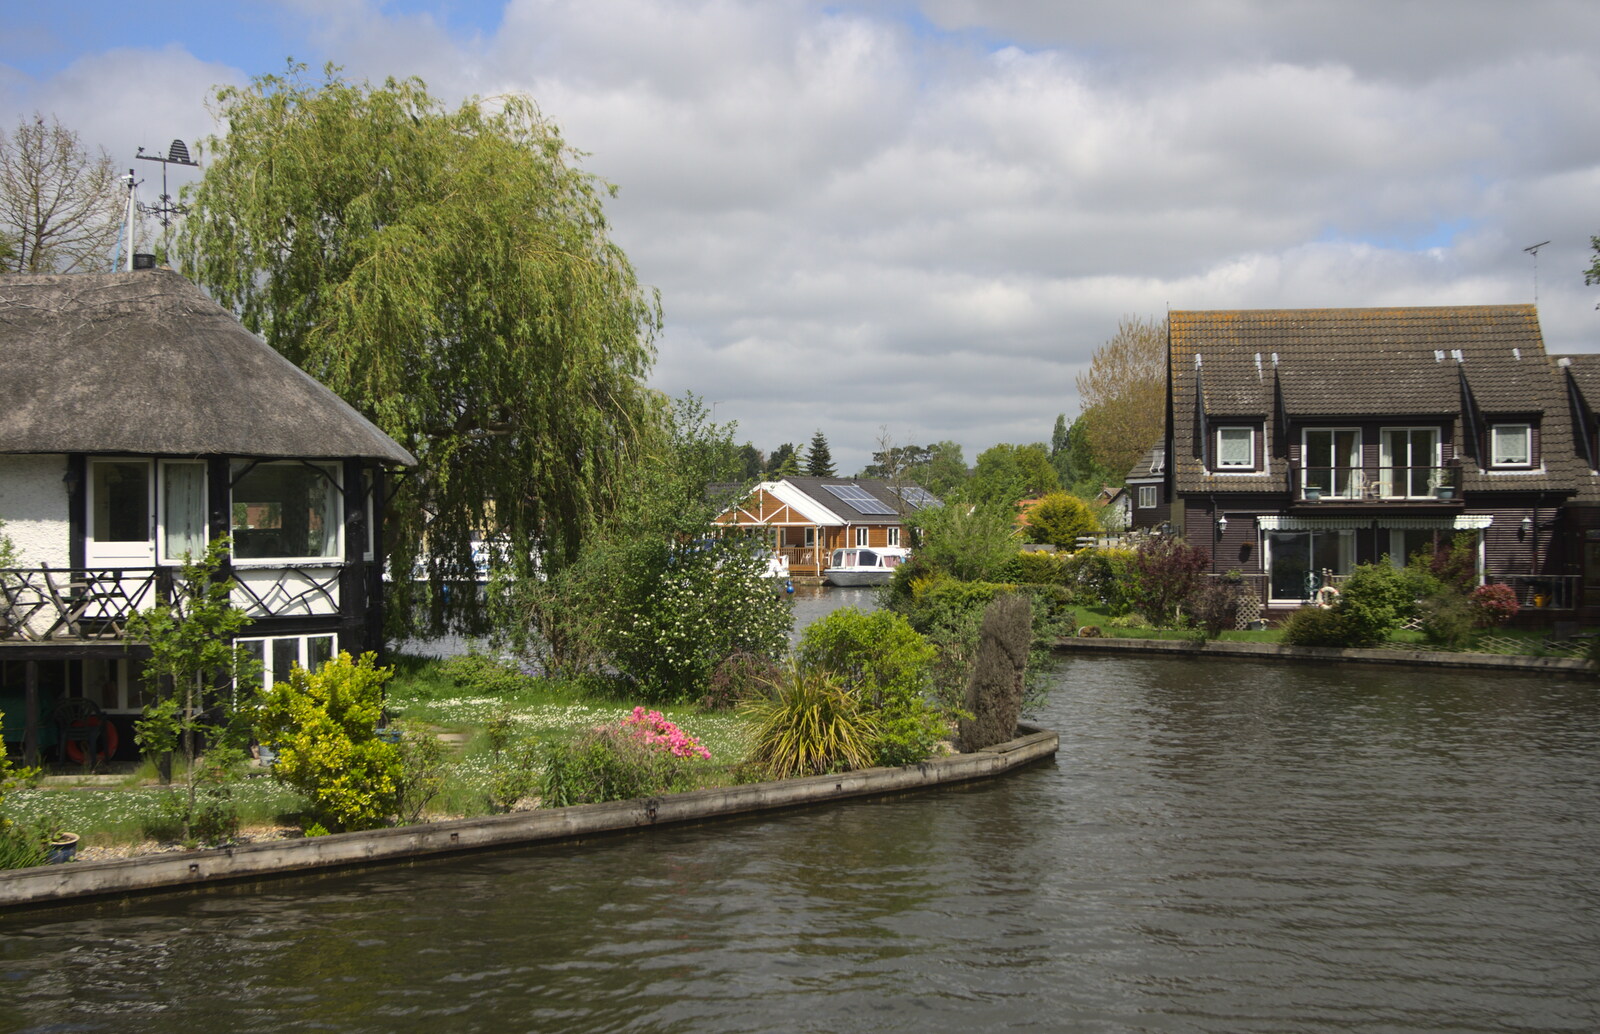 Picturesque, and expensive, riverside houses from A Trip on the Norfolk Broads, Wroxham, Norfolk - 25th May 2013